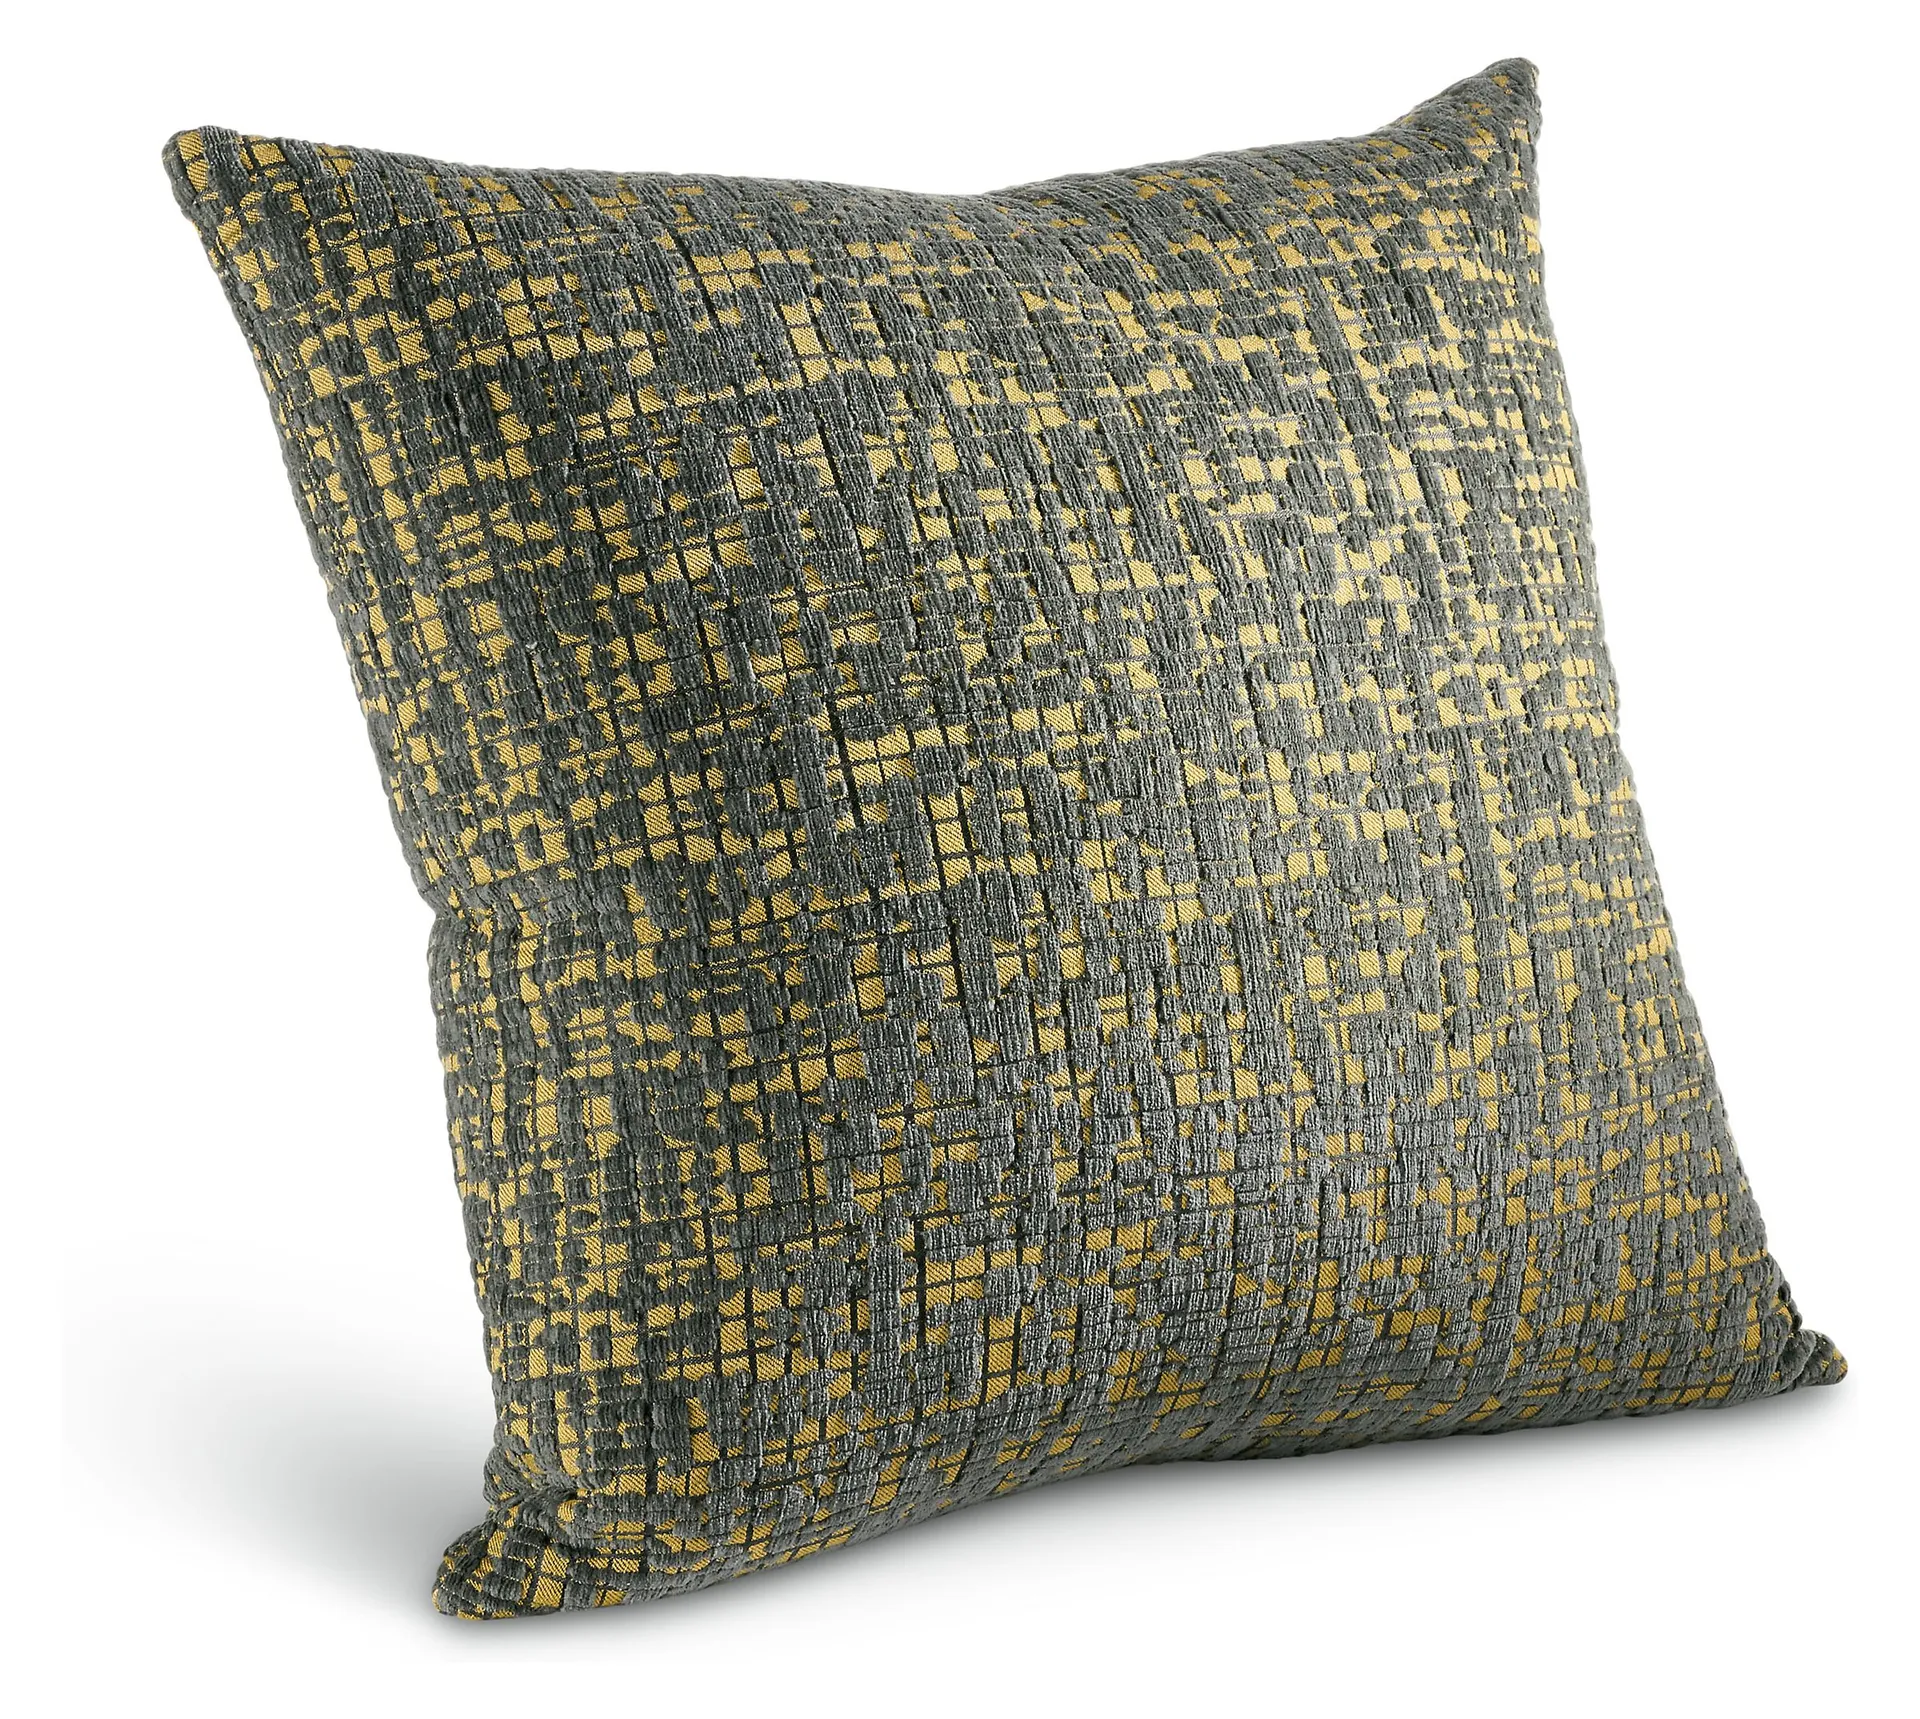 Staccato 24w 24h Throw Pillow in Mustard